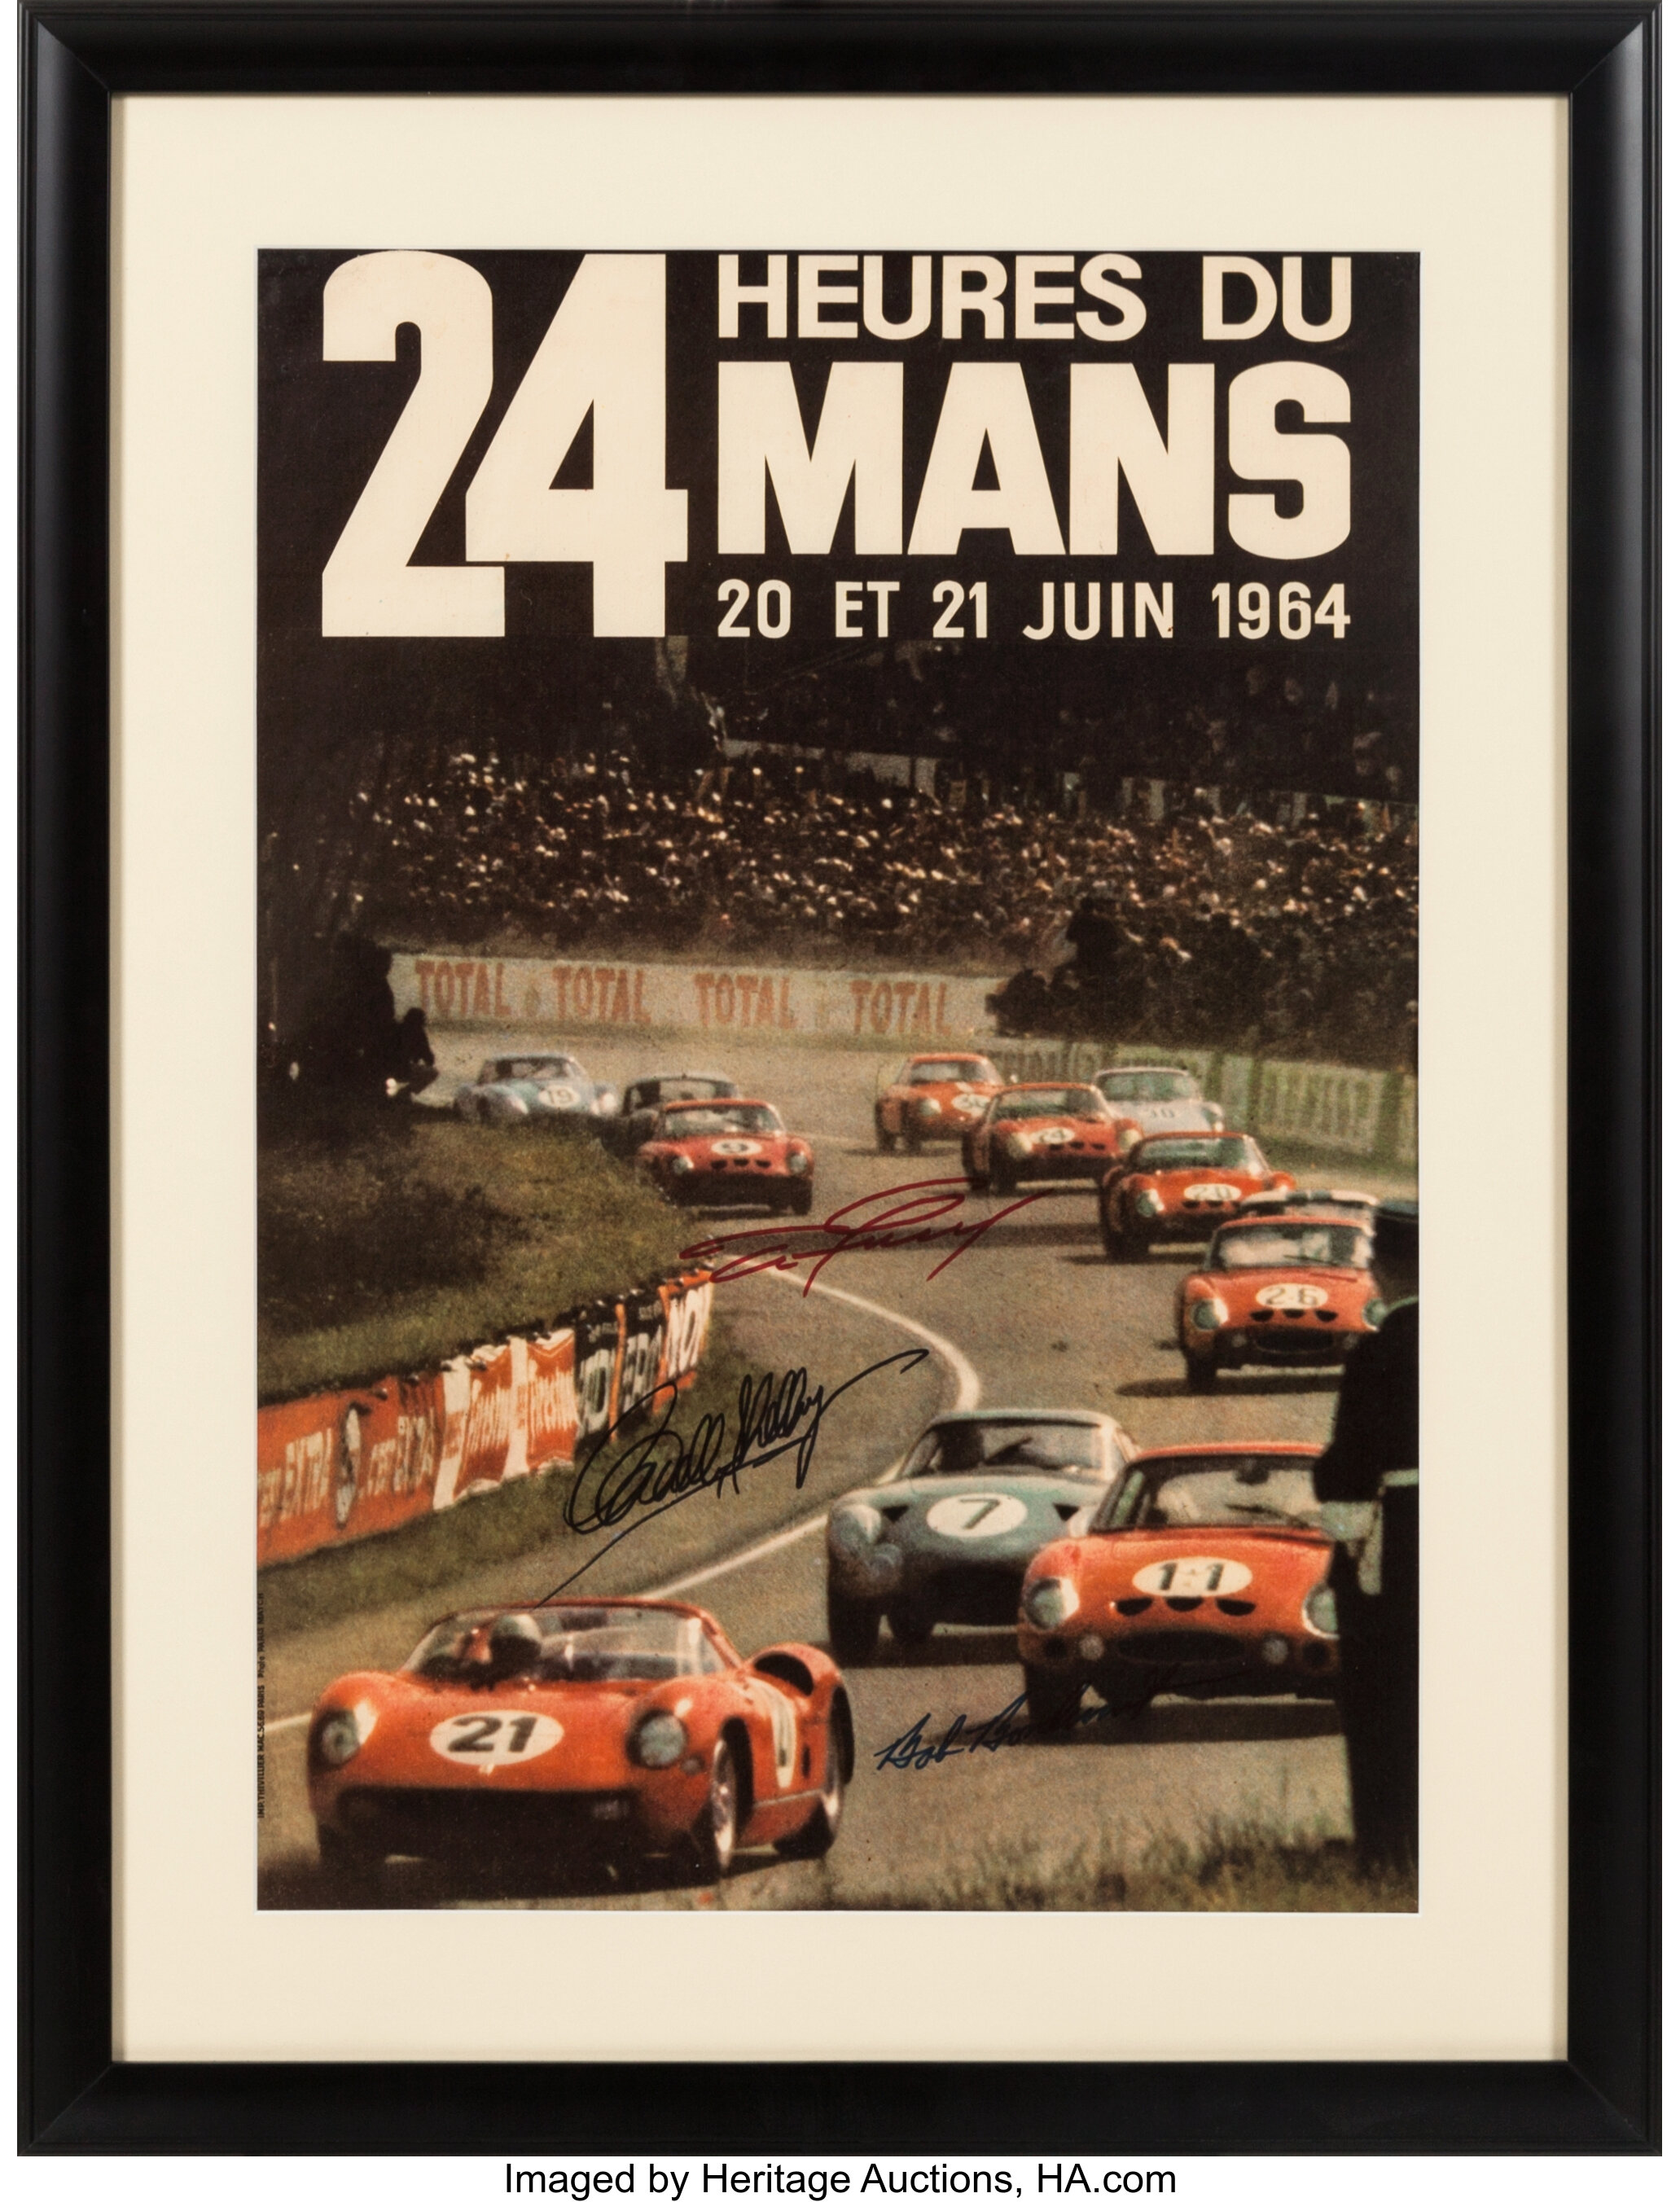 Original 1964 Le Mans Poster Autographed By Carroll Shelby Dan Lot 97038 Heritage Auctions